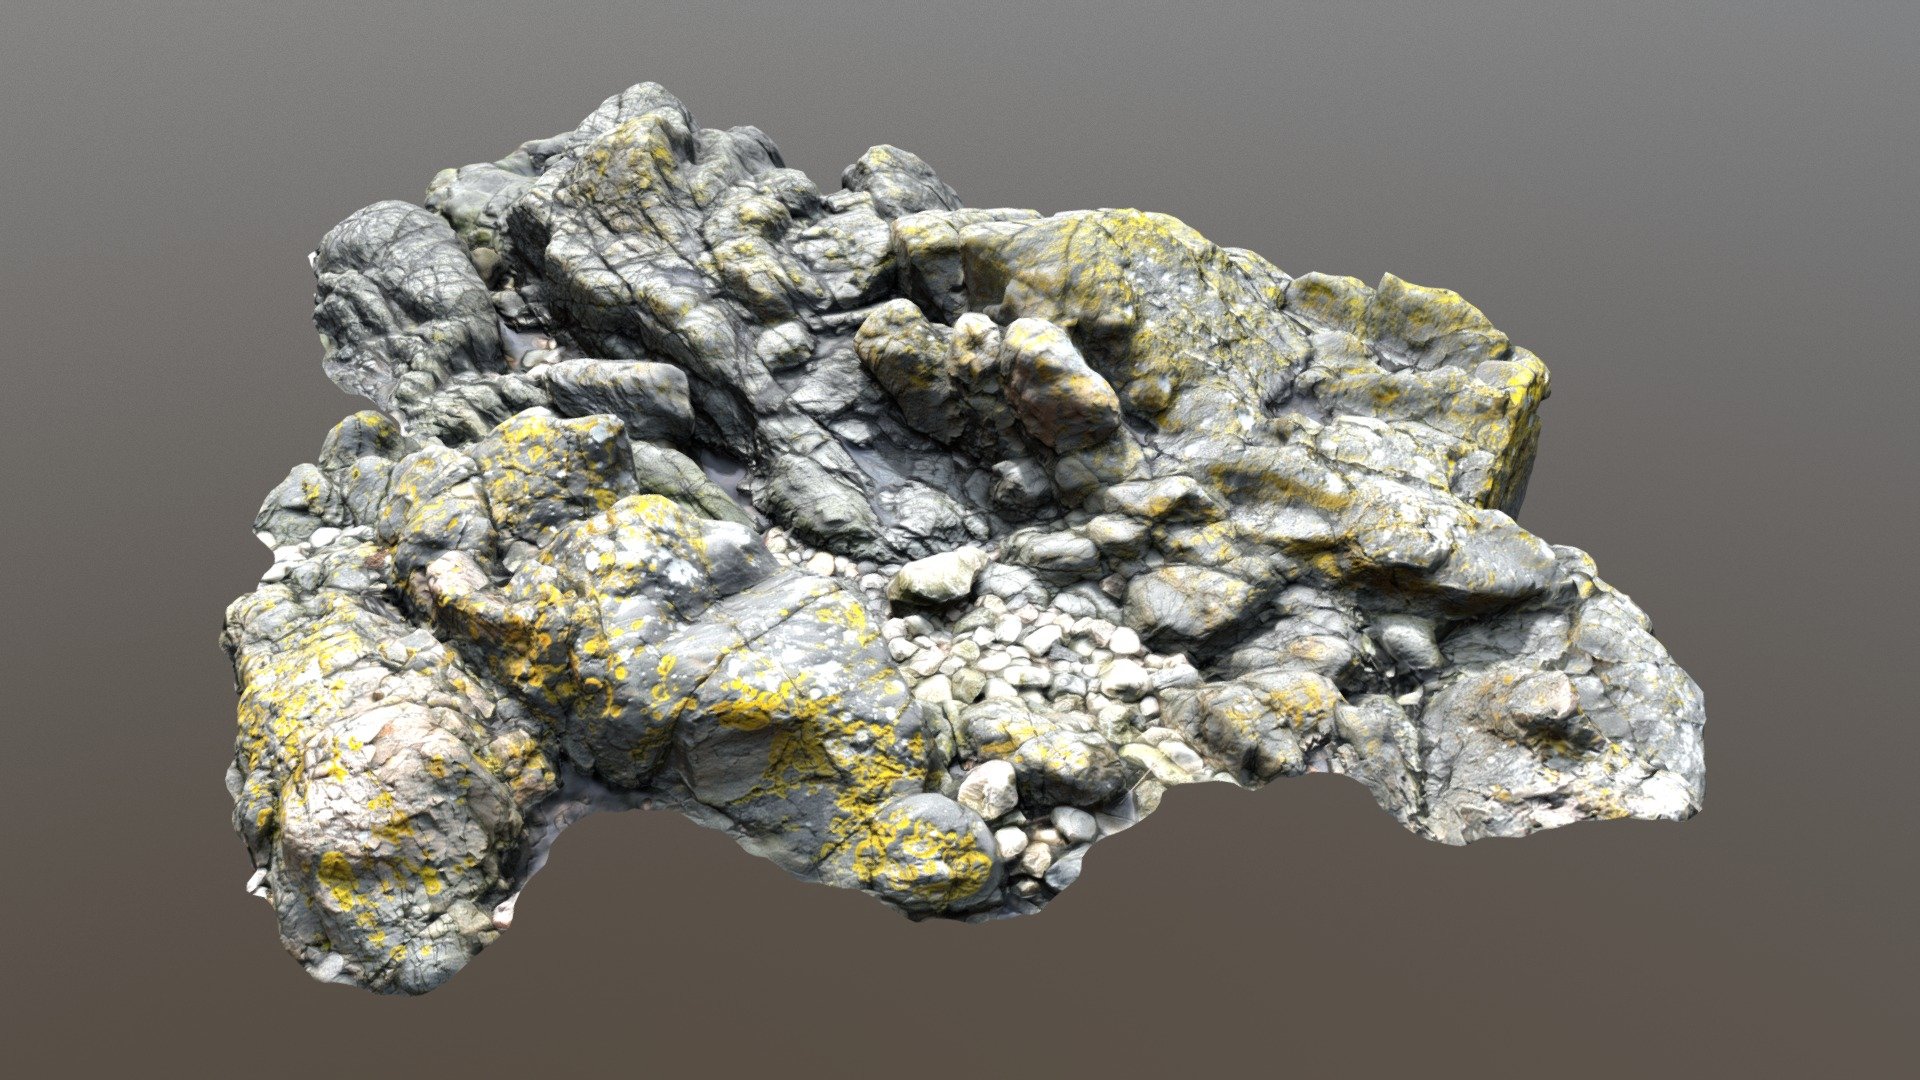 3d scanned rock cliff L

3d scanned cliff/ground - Nature Rock Cliff L - Buy Royalty Free 3D model by 3drille 3d model